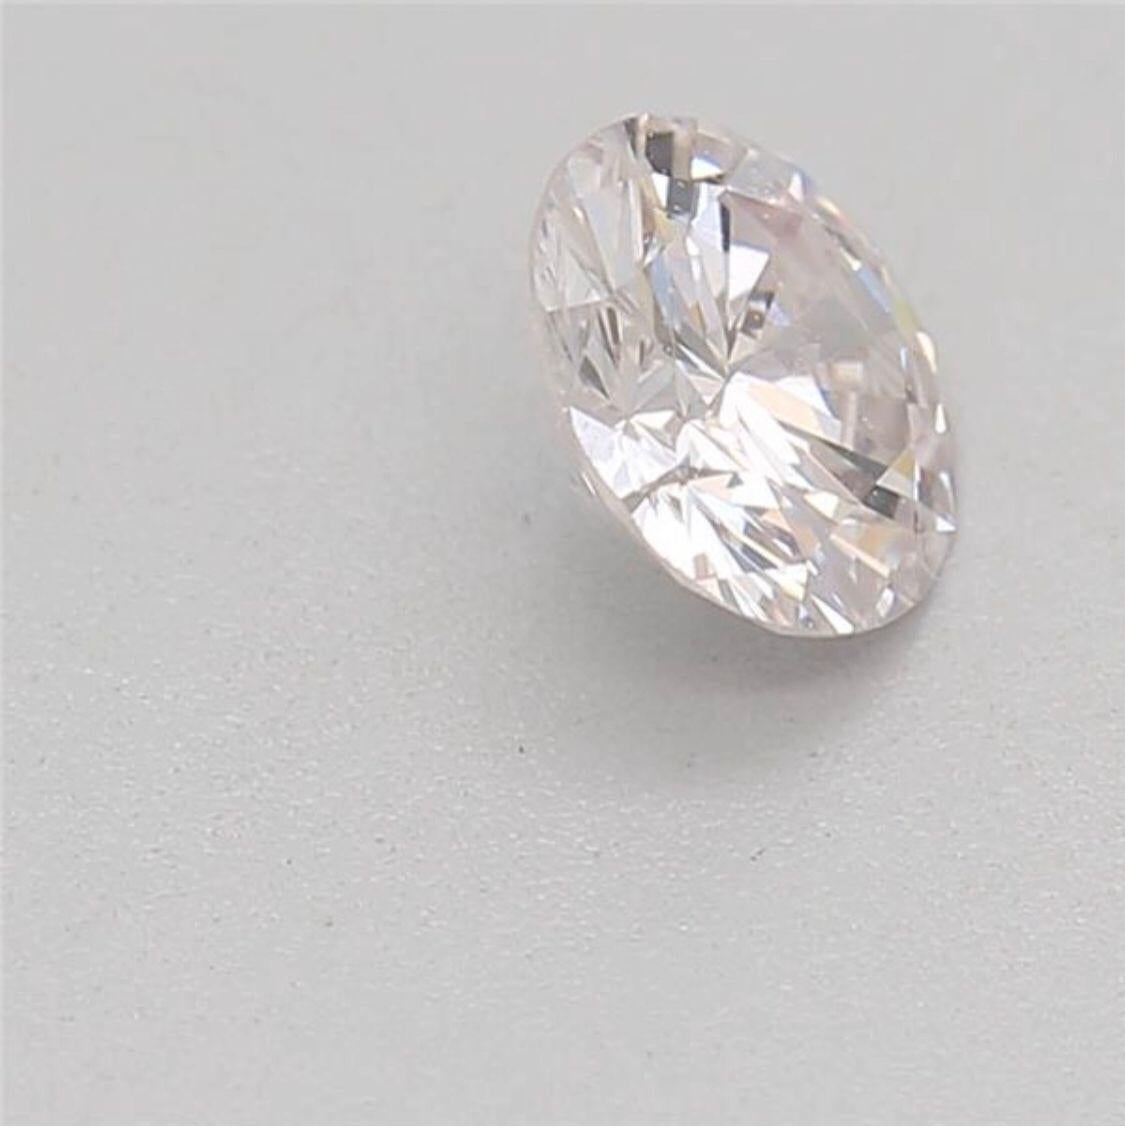 0.31 Carat Faint Pink Round Cut Diamond SI1 Clarity CGL Certified For Sale 3